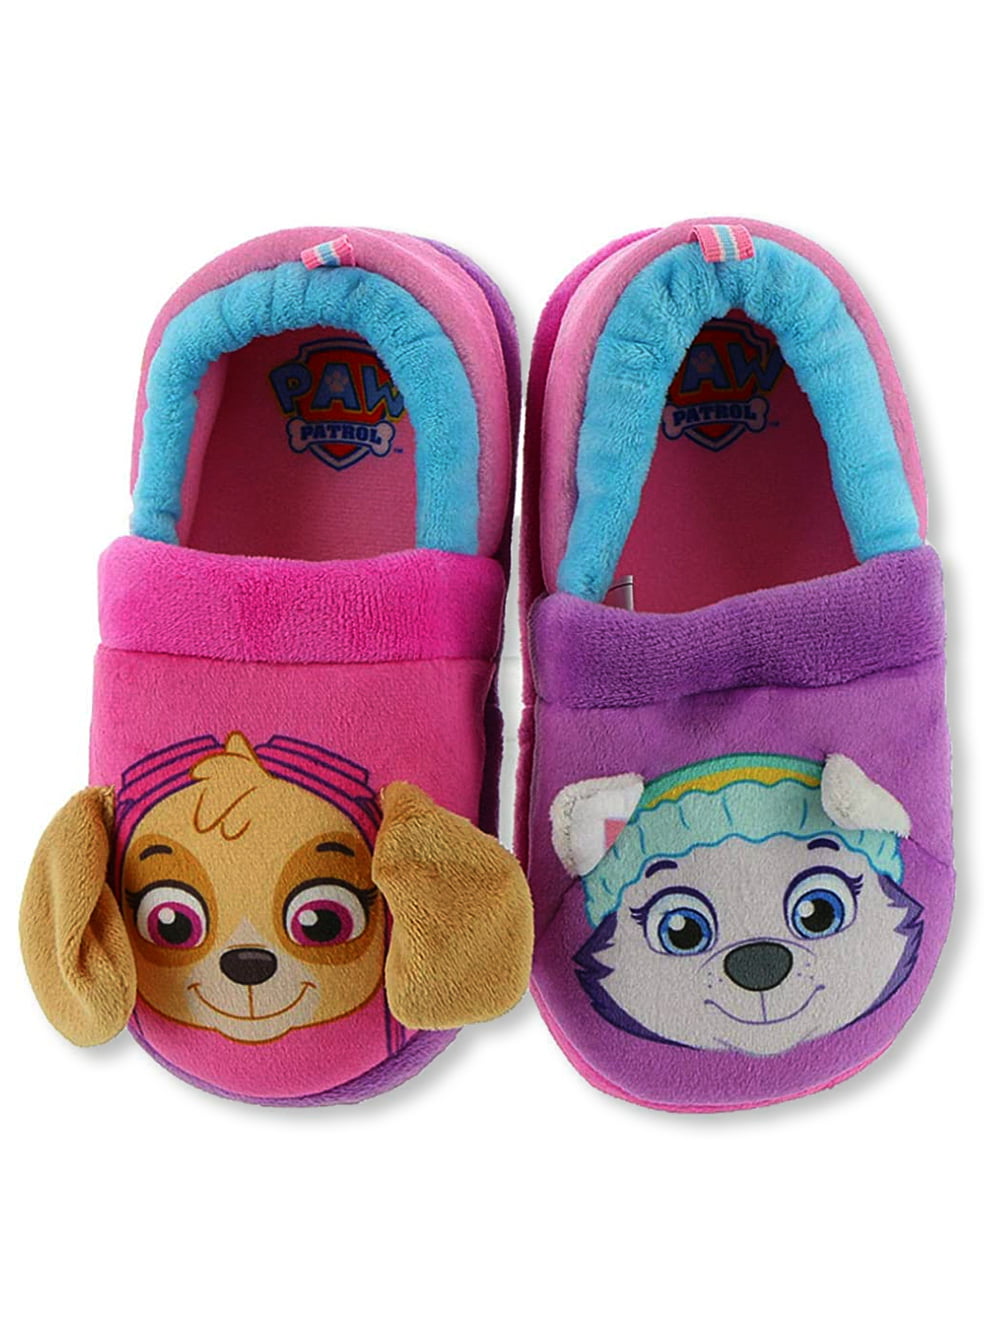 Nickelodeon® Paw Patrol Kids Sandals Slippers UK Sizes 18months to 9years 